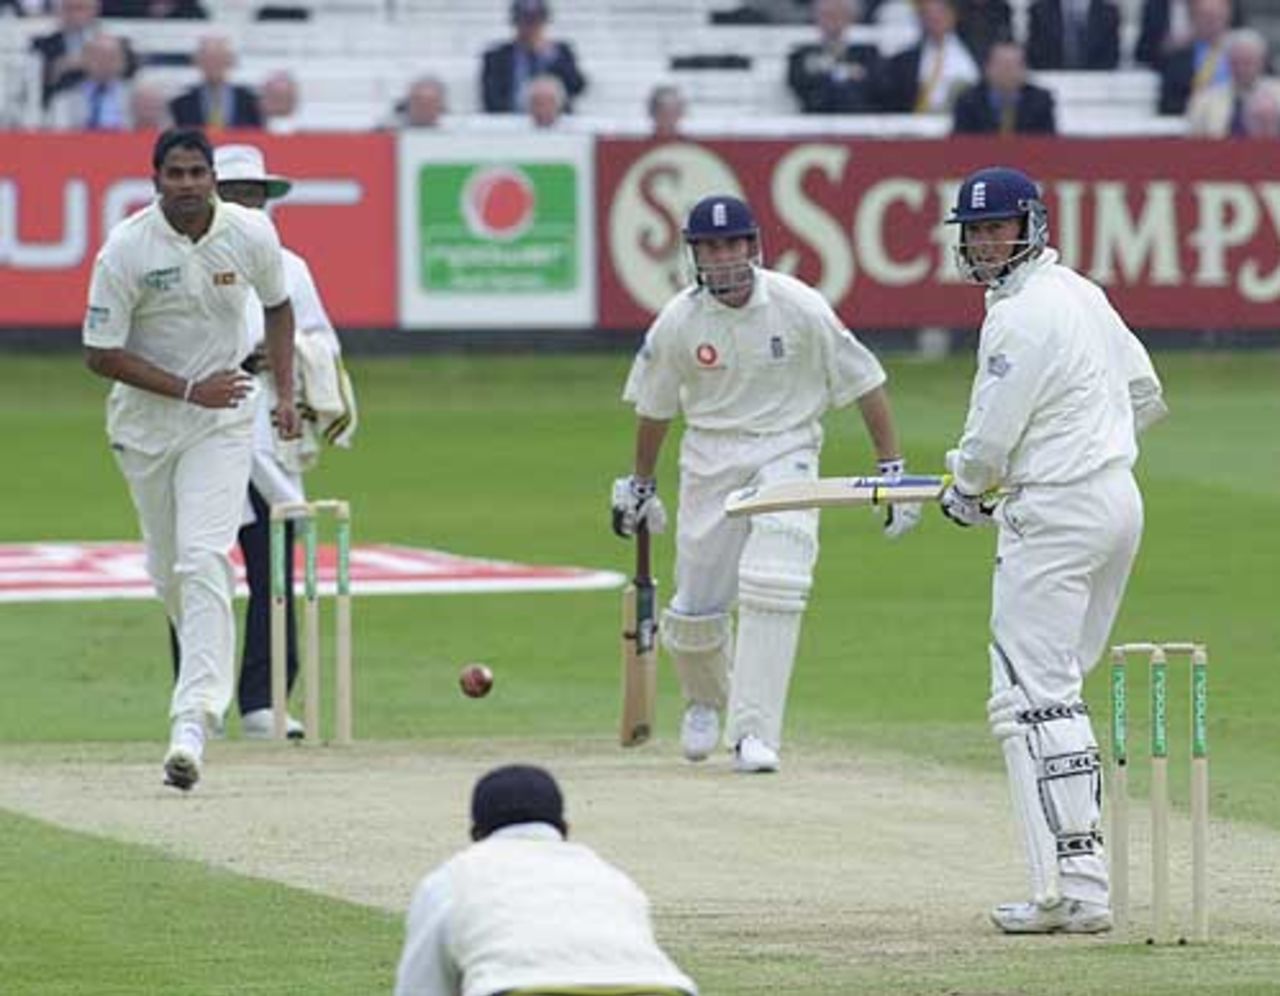 Trescothick edges a Zoysa delivery to be caught by Jayasuriya at slip for 13, 1st Test Lord's May 2002